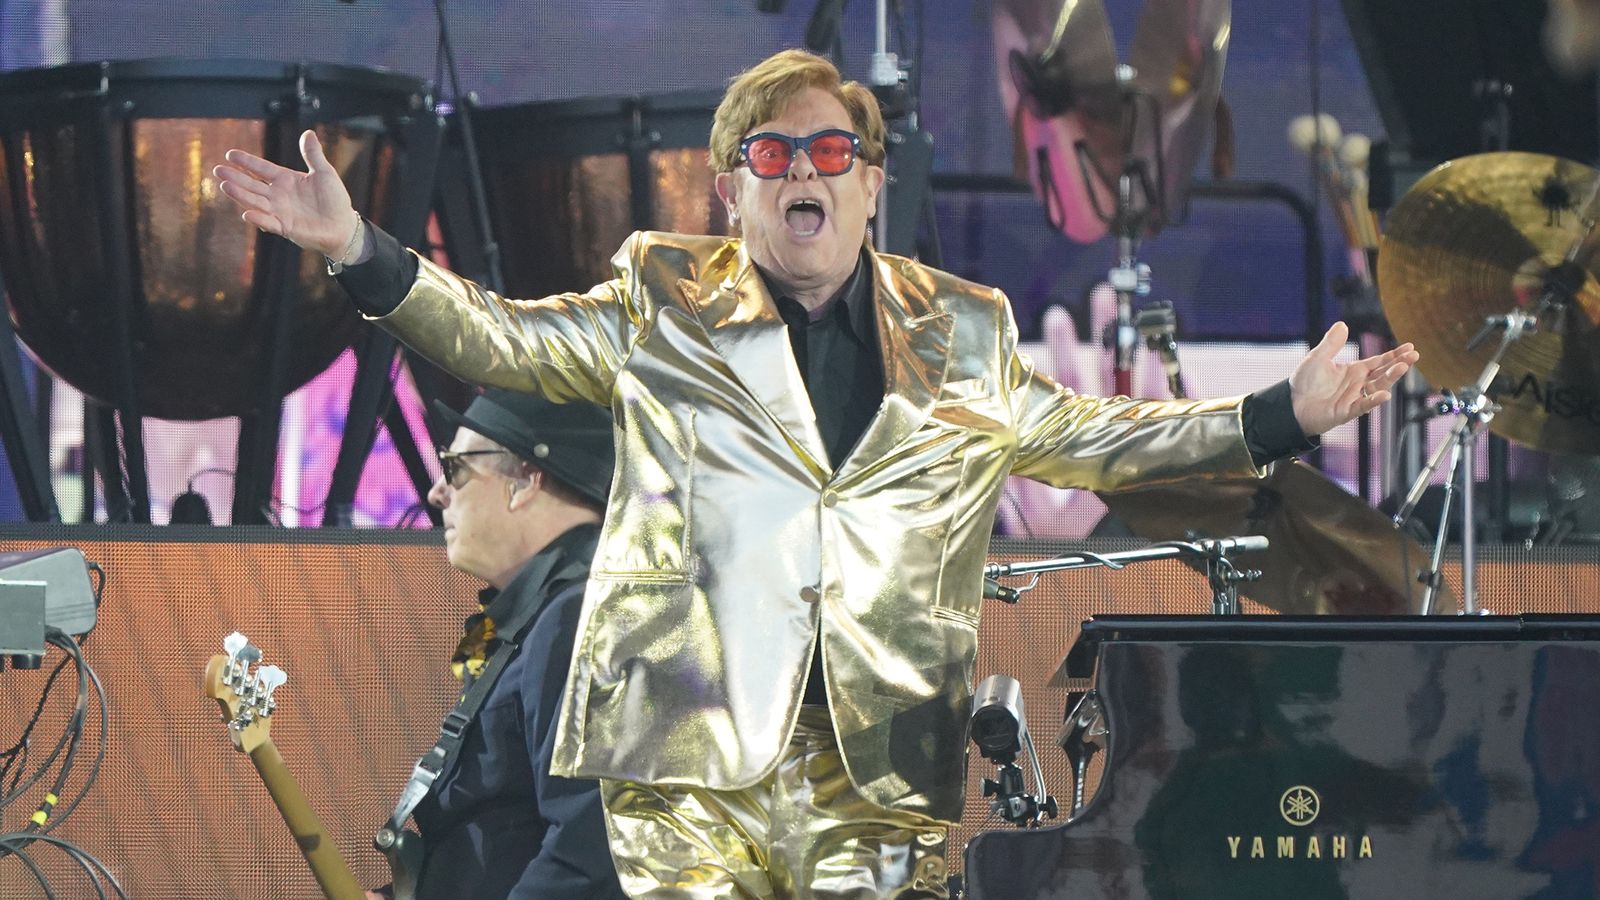 Sir Elton John closes Glastonbury with history-making goodbye - telling fans: 'I will never forget you'